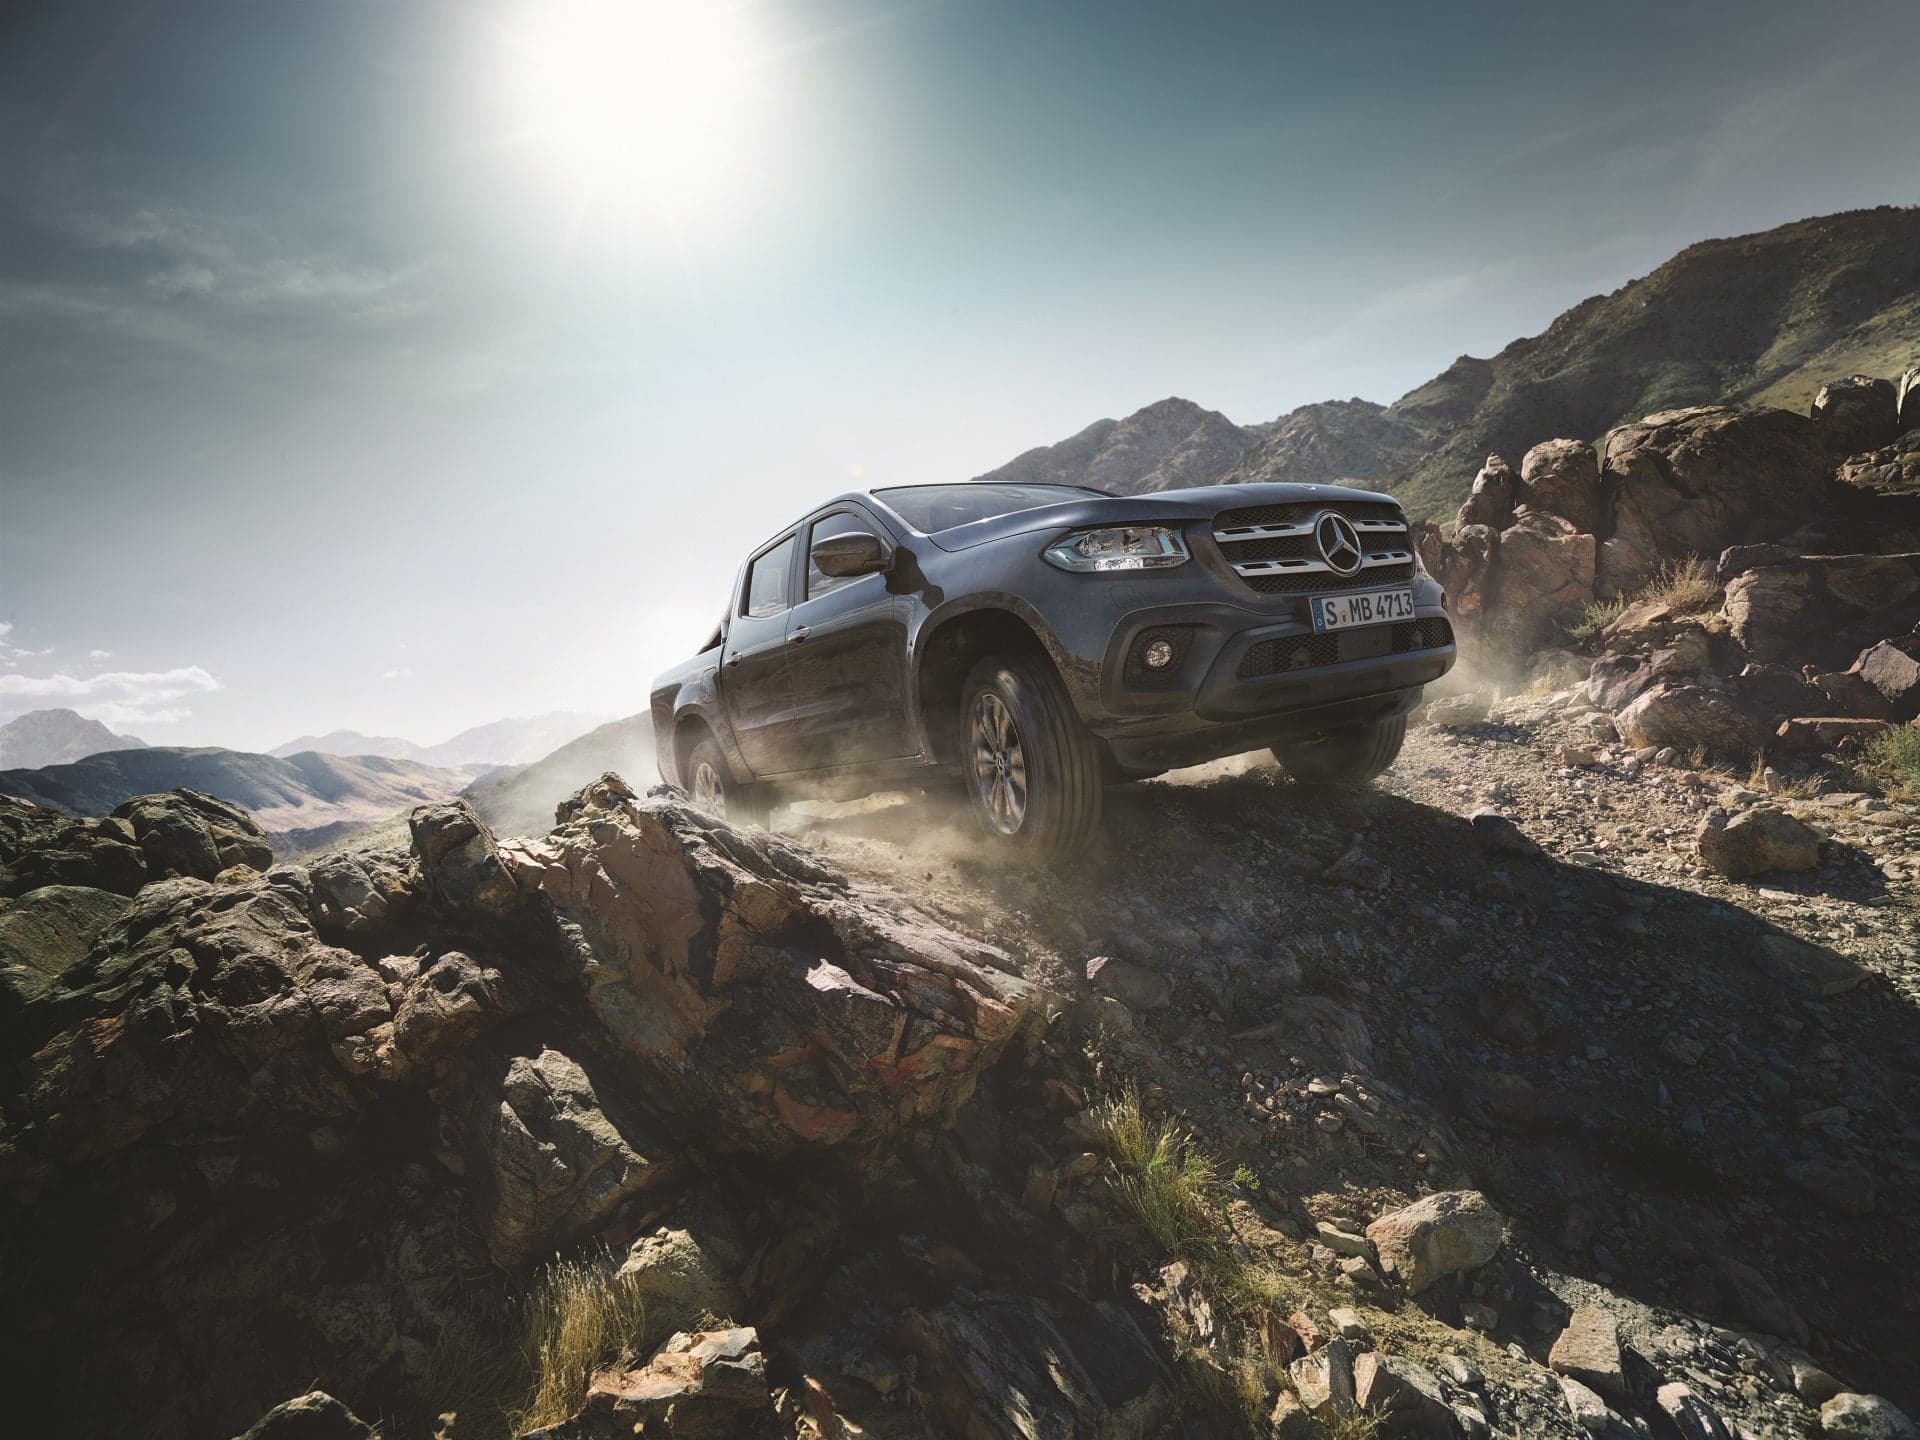 Mercedes Promotes X-Class by Sponsoring UCI Mountain Bike Championship